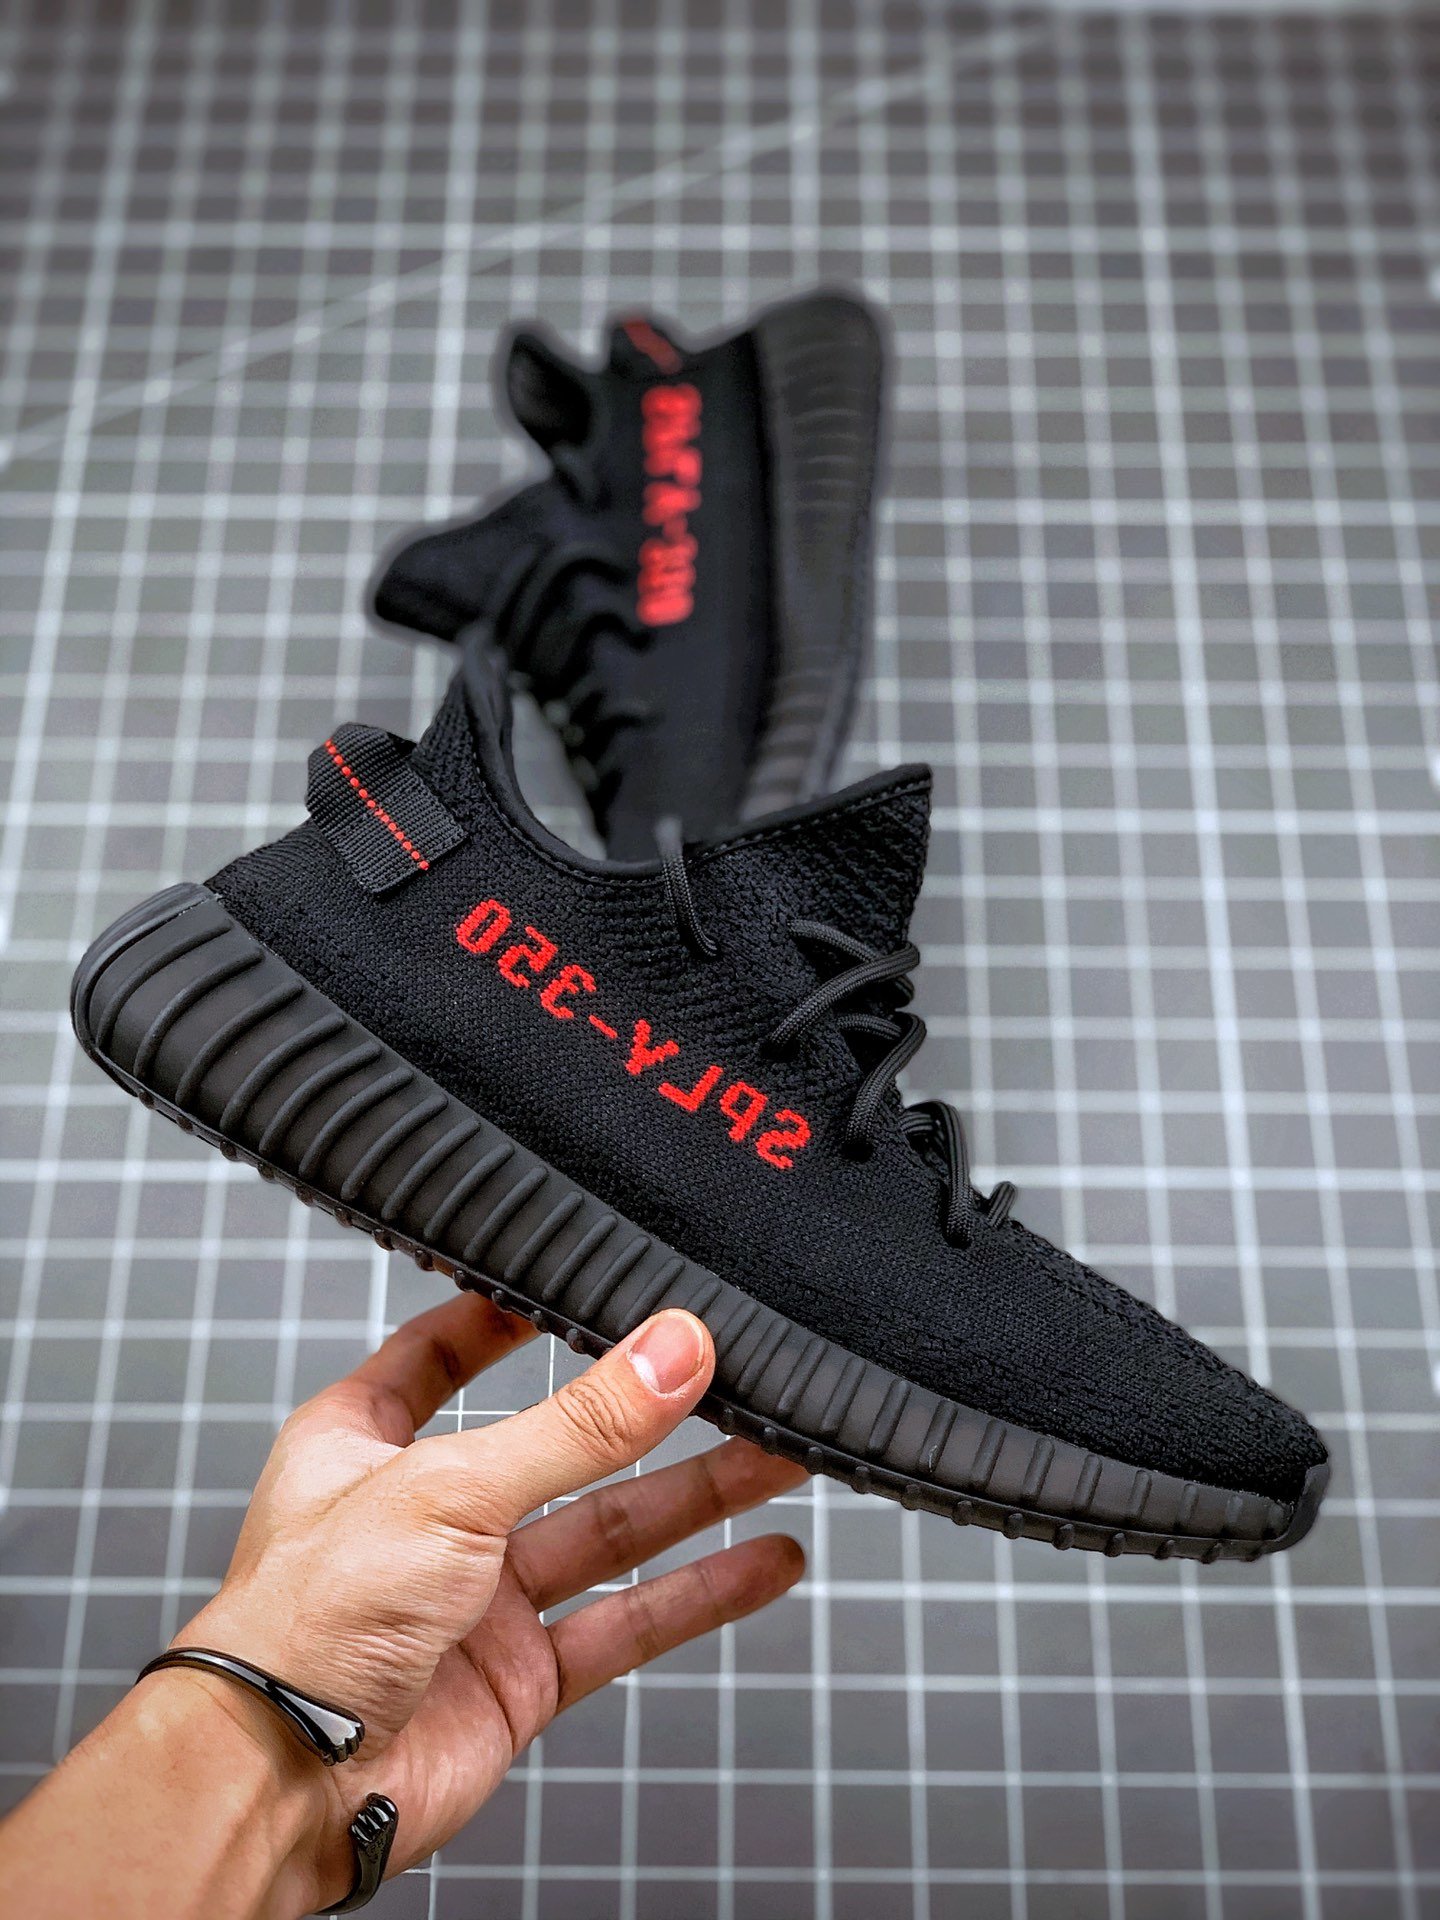 adidas Yeezy Boost 350 V2 “Bred” CP9652 For Sale – Sneaker Hello